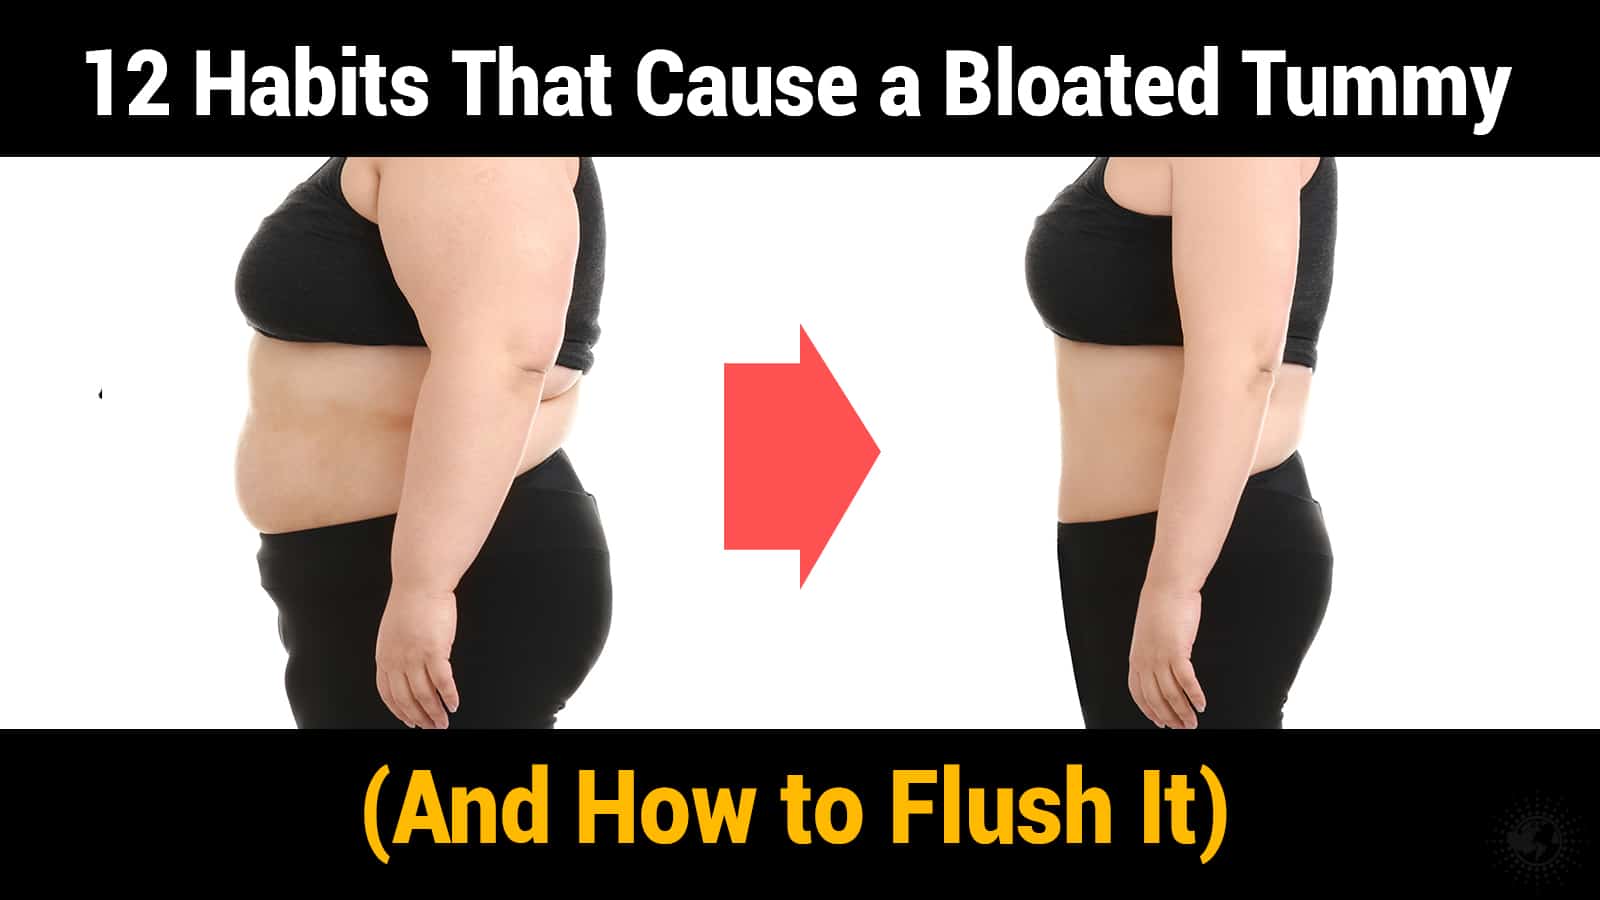 12 Habits That Cause a Bloated Tummy (And How to Flush It)